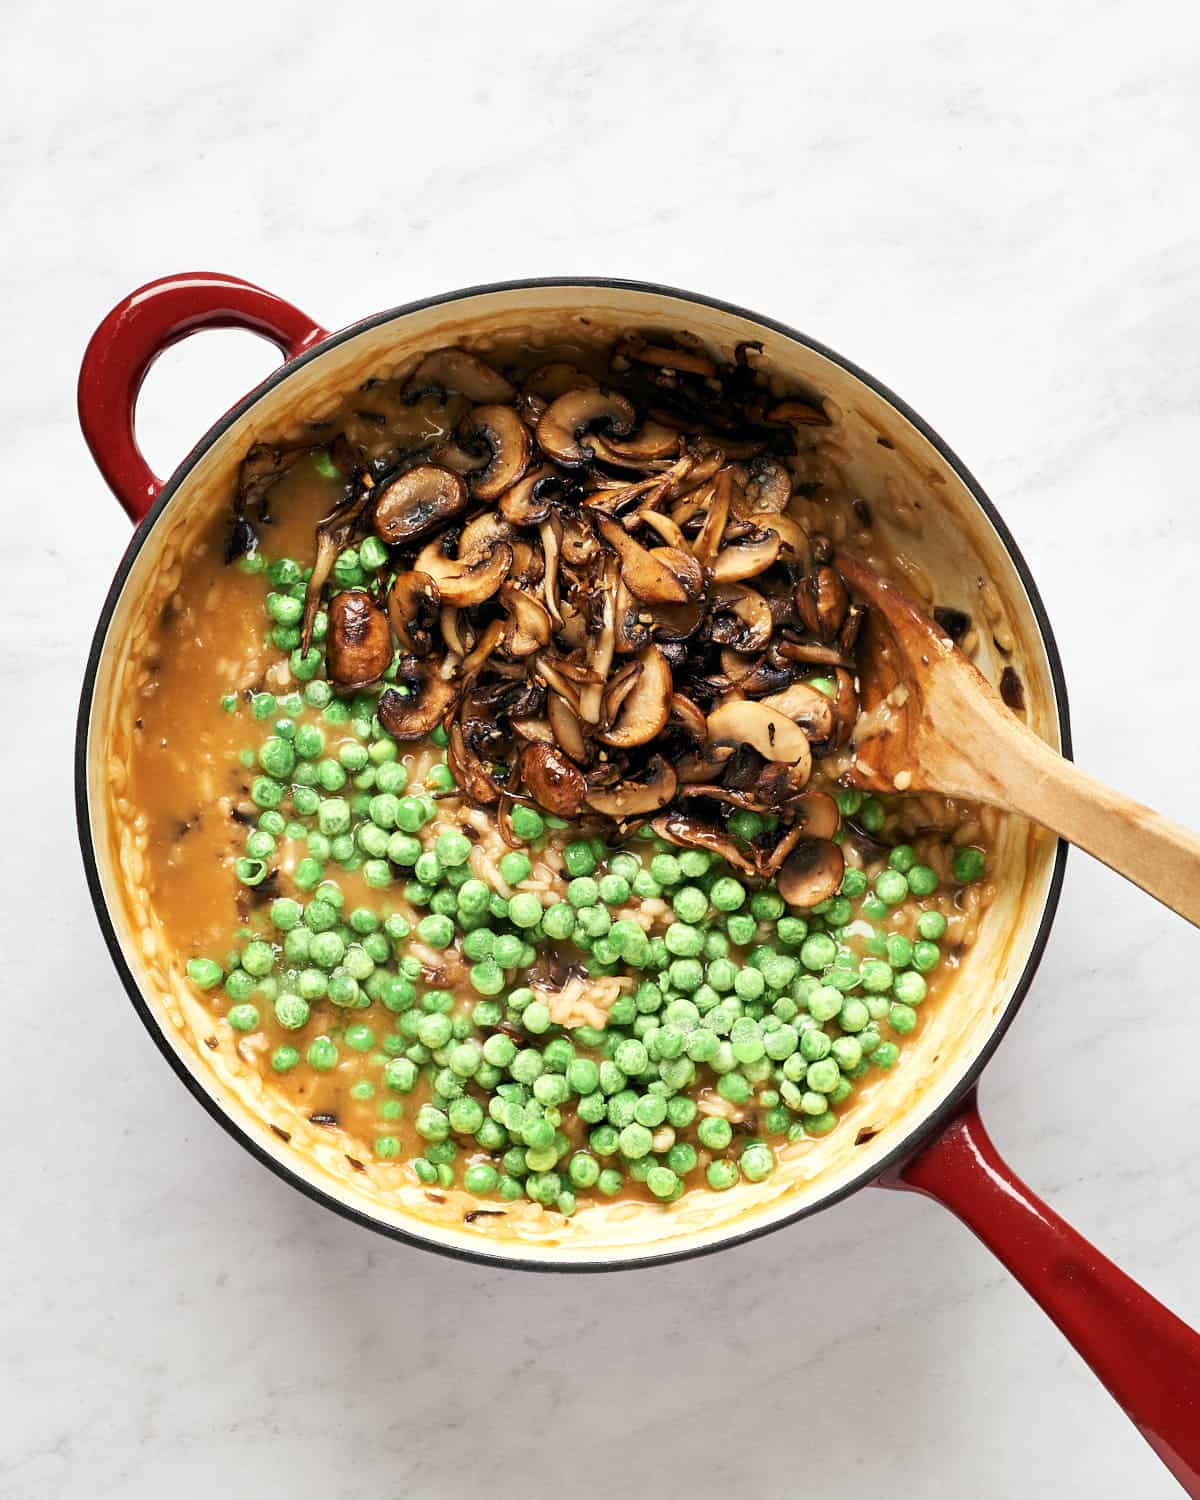 Cooked mushrooms and frozen peas added to risotto in saucepan on marble background